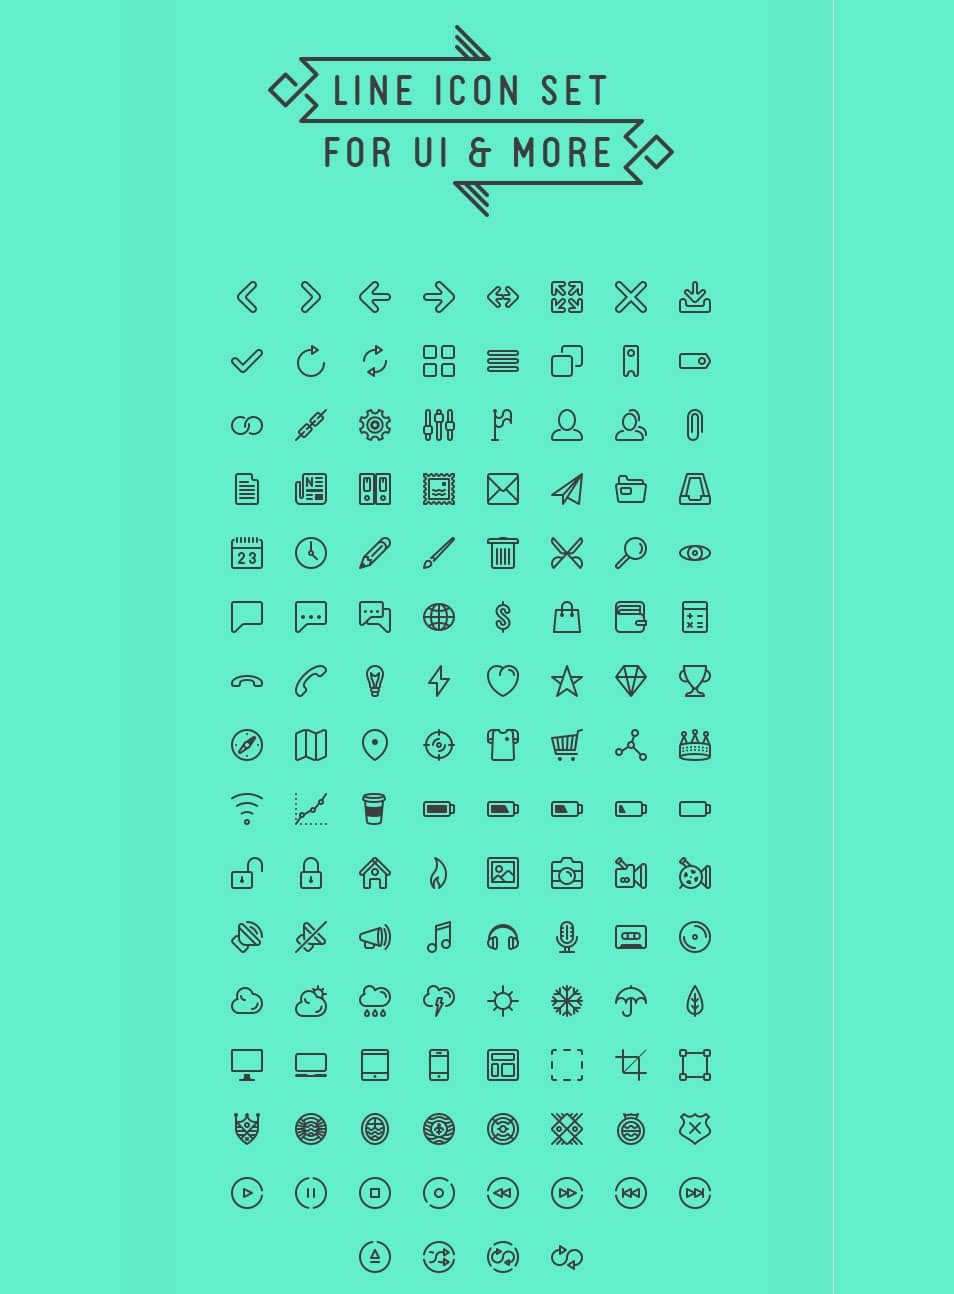 Line icon set for UI & more